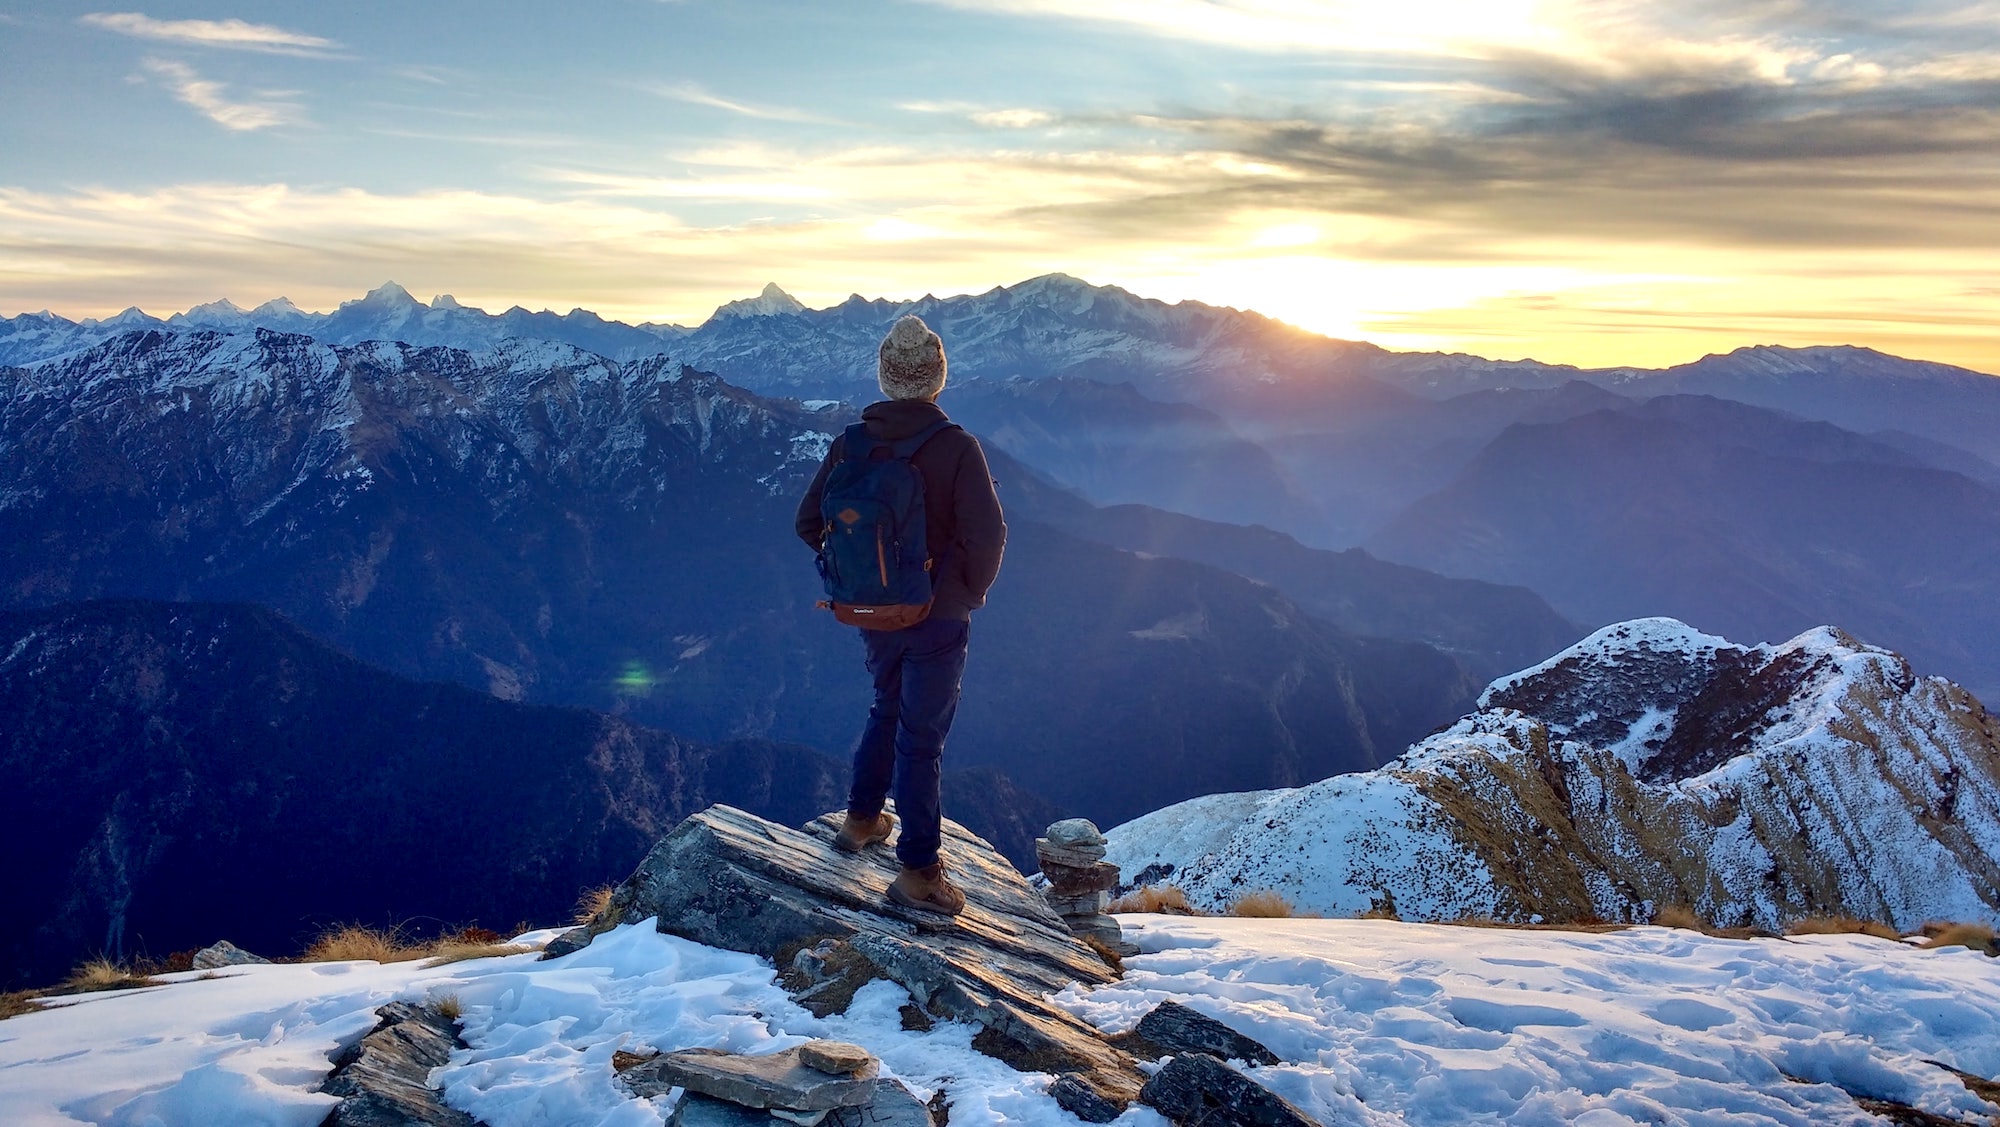 a person stands on a snow covered mountain top looking out a vista of rocky mountains as the sun peeks above the horizon